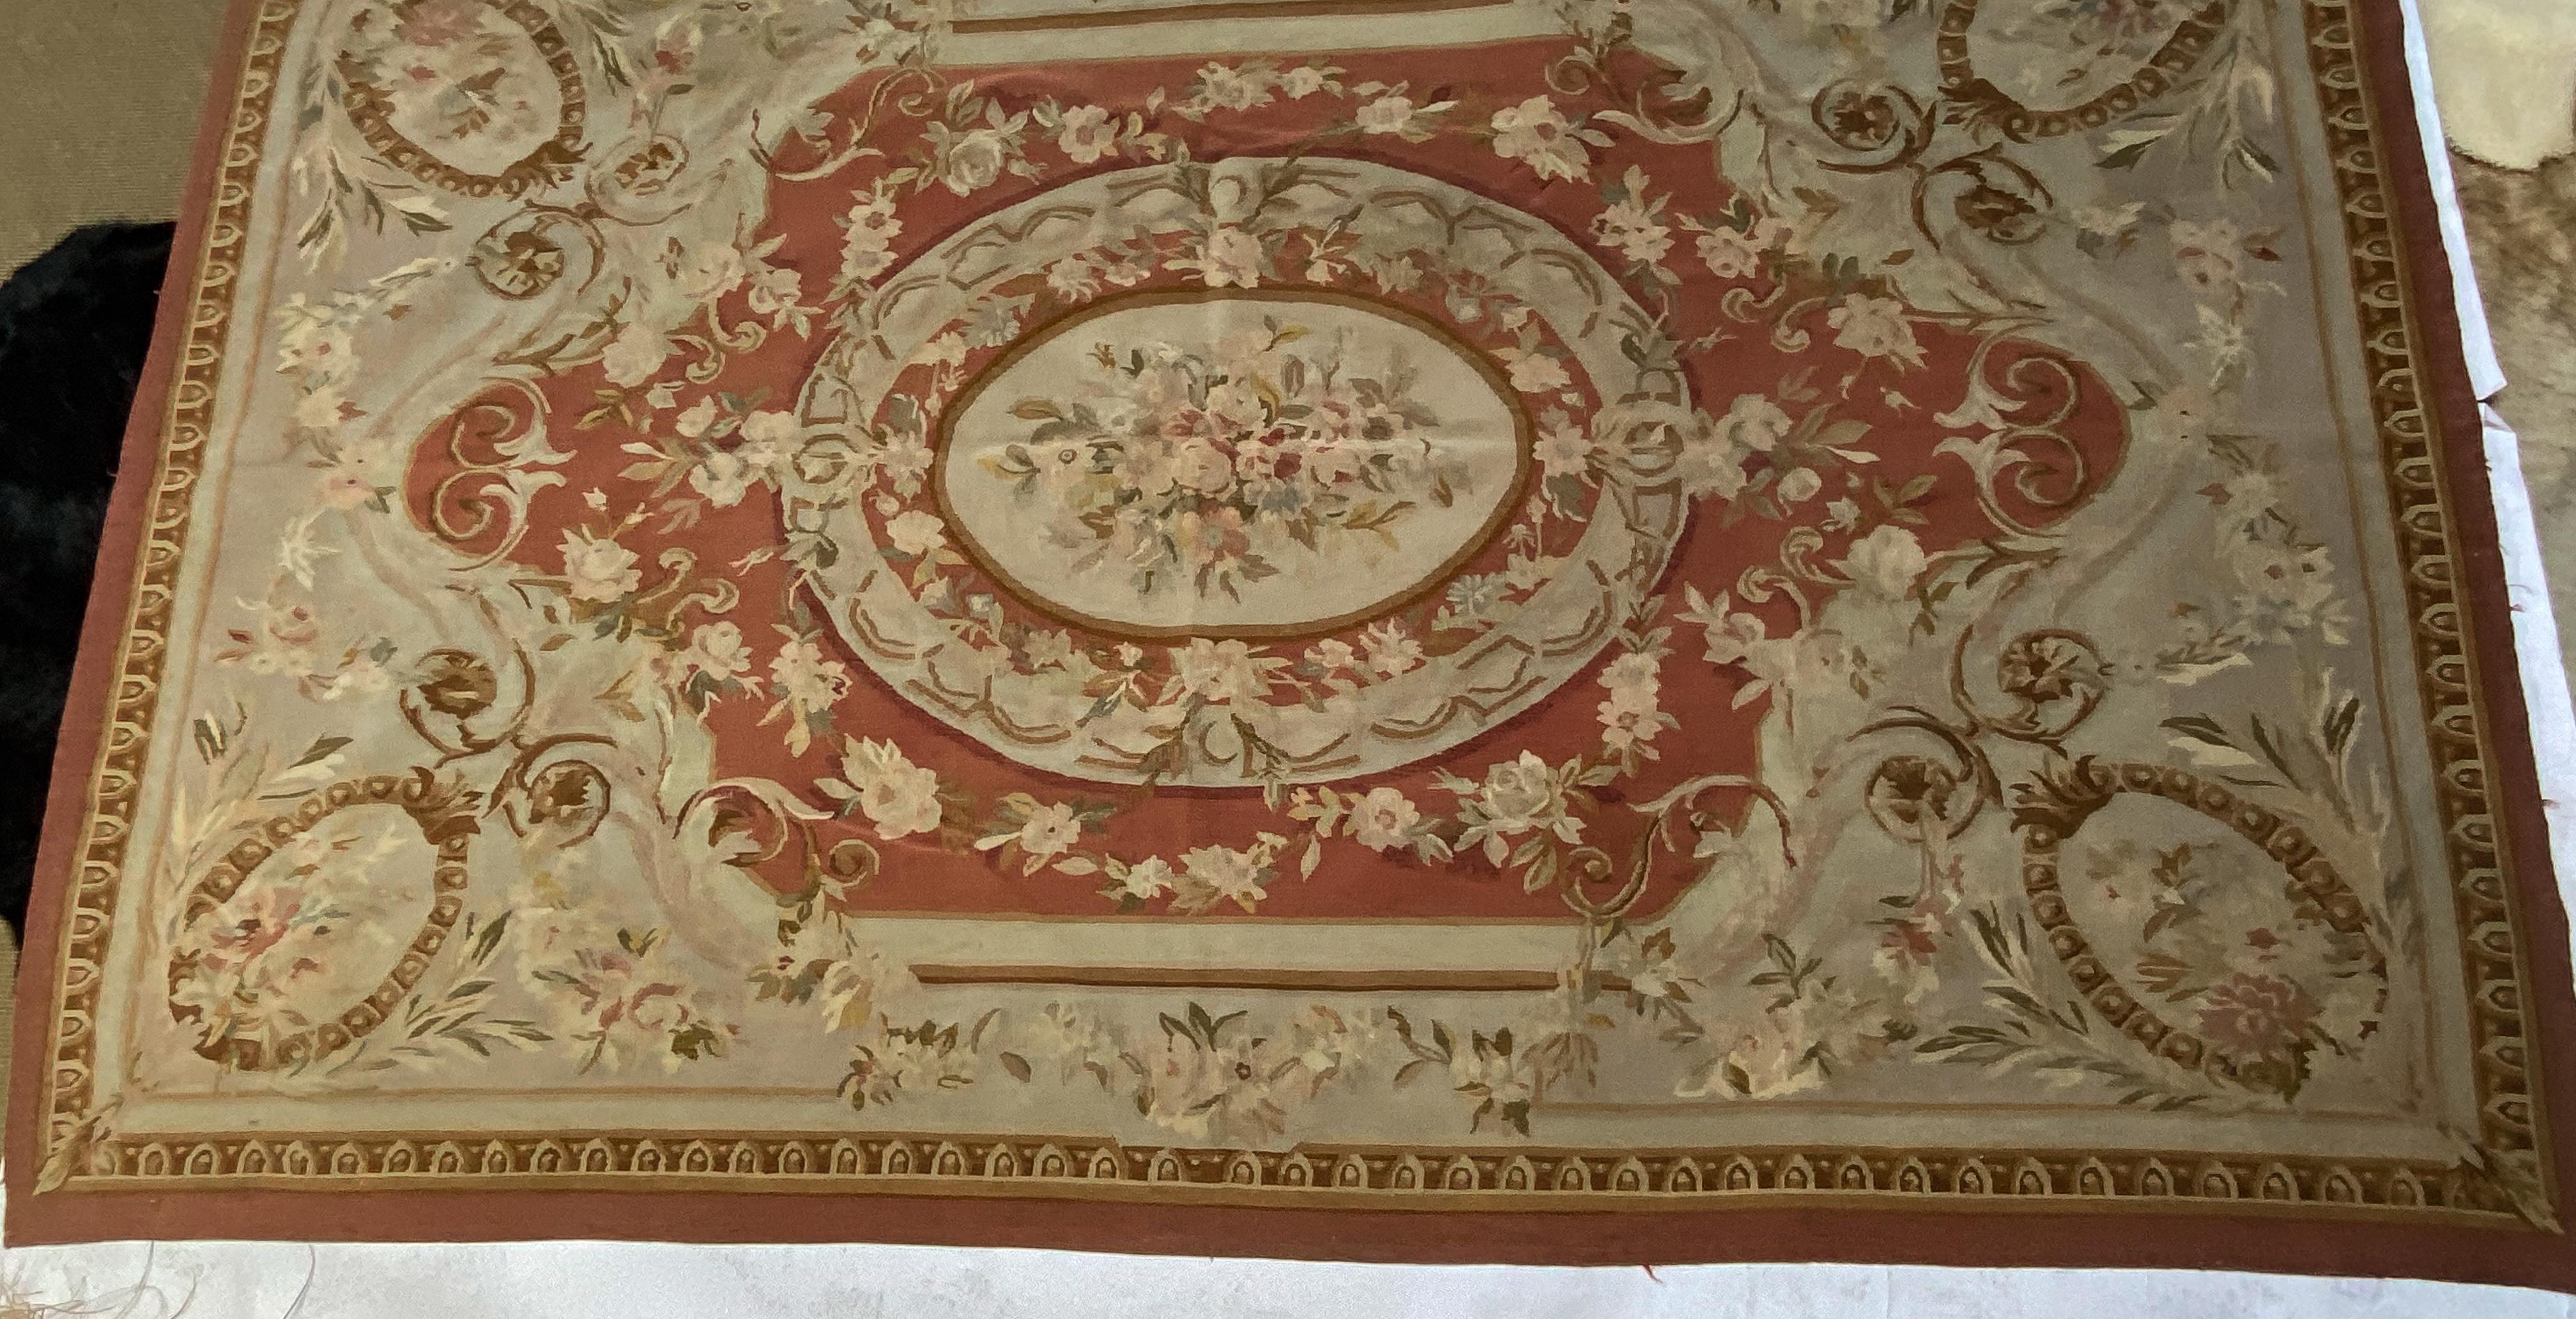 Aubusson rug from the 1960s, traditional style with ocher / burnt orange border and center with floral detail and gold scrolling. 